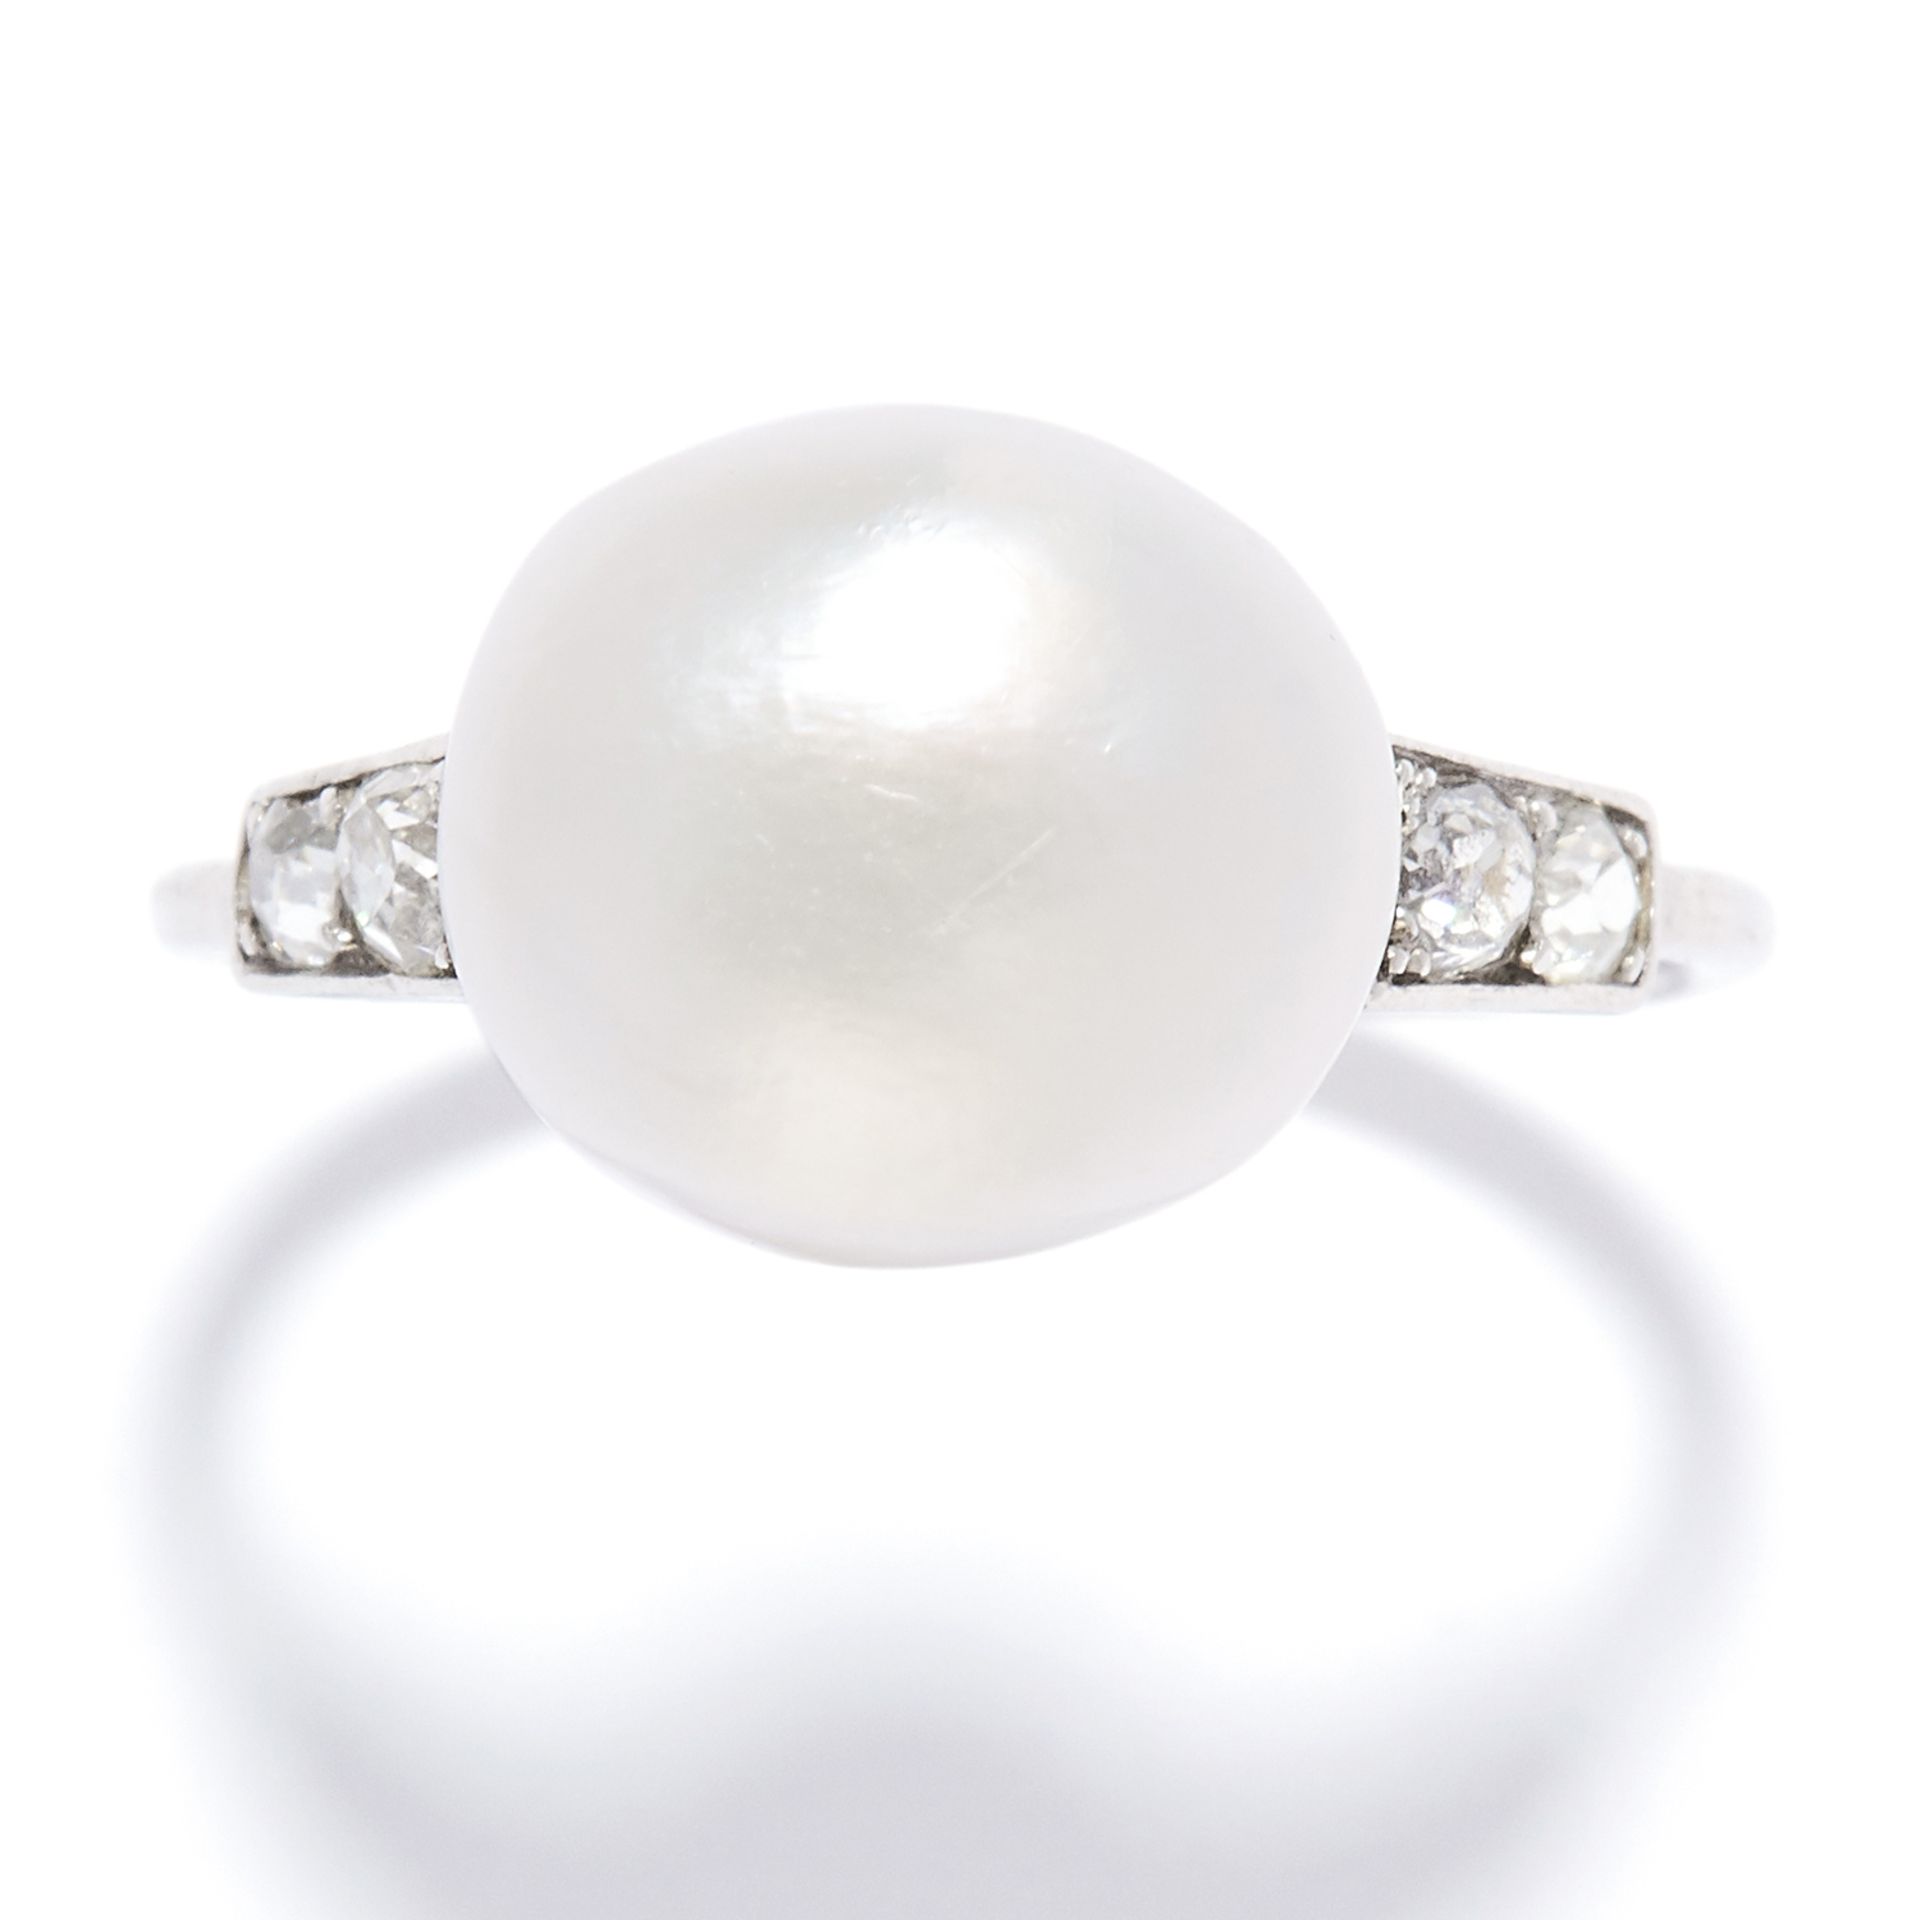 ANTIQUE NATURAL PEARL AND DIAMOND RING in platinum, the pearl of 11.3mm flanked by pairs of old